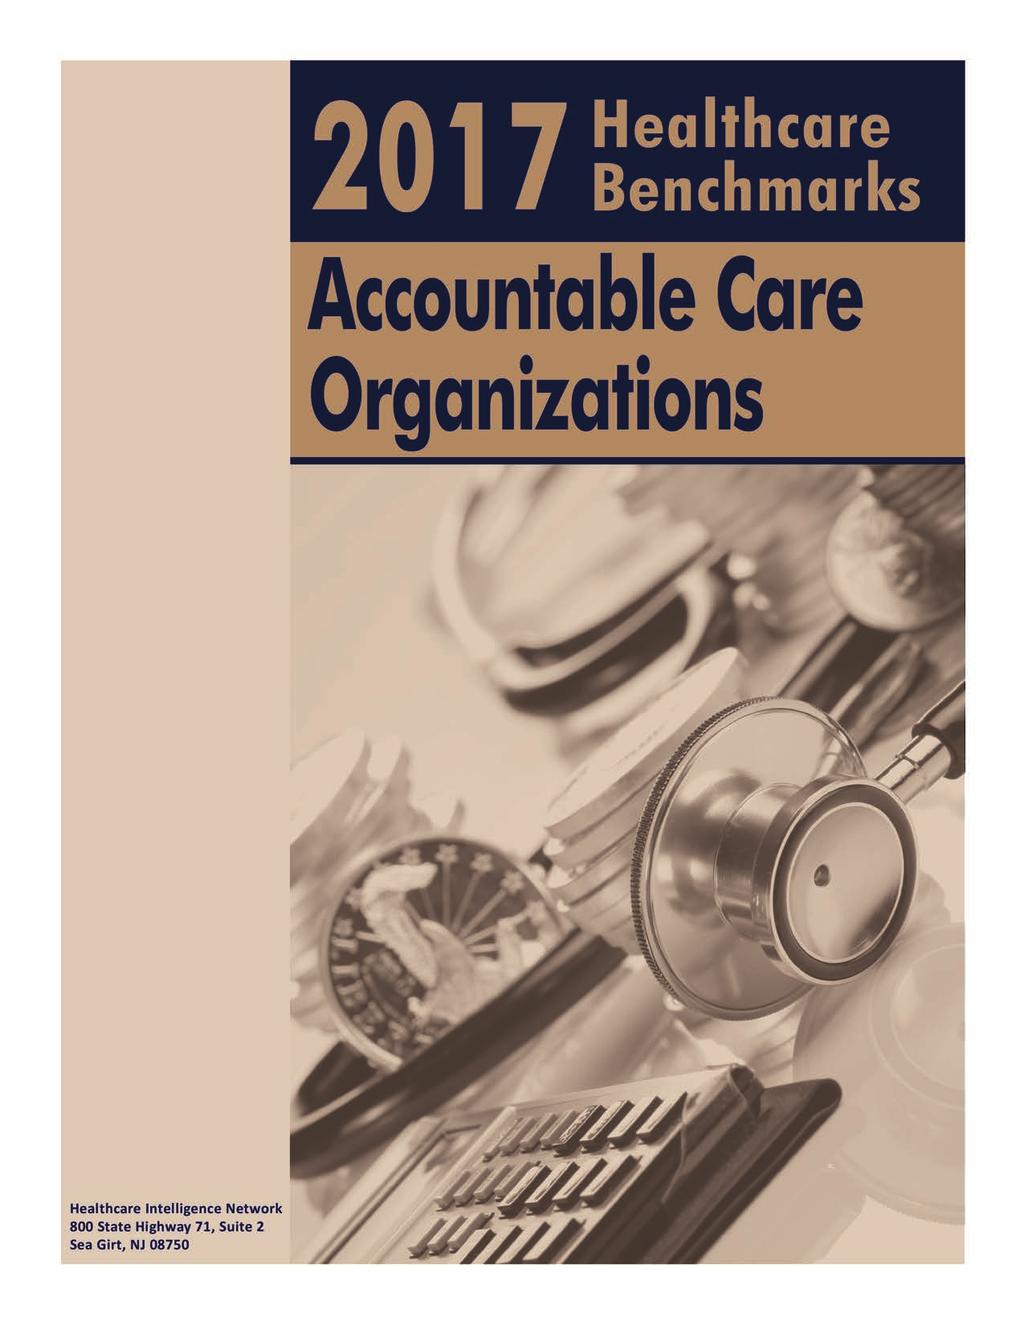 Note: This is an authorized excerpt from 2017 Healthcare Benchmarks: Accountable Care Organizations.